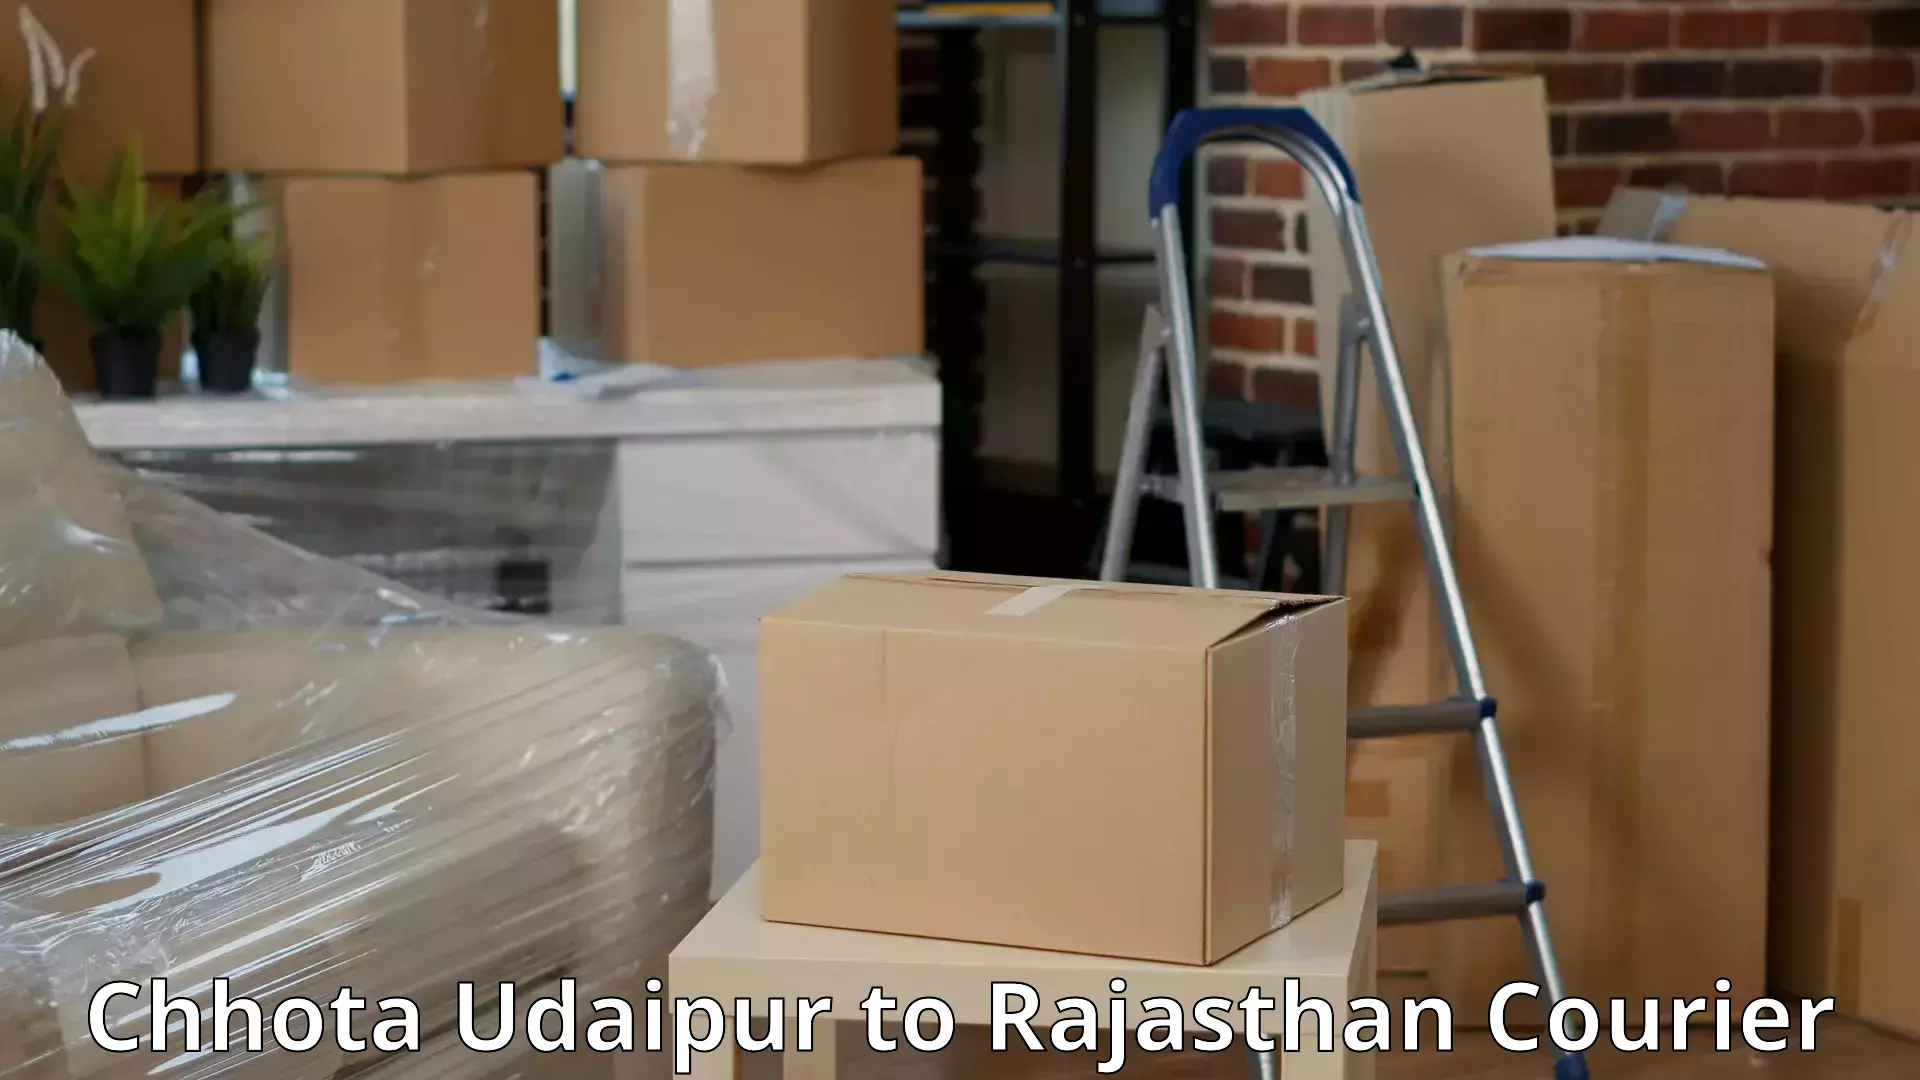 Expert moving and storage in Chhota Udaipur to Tonk